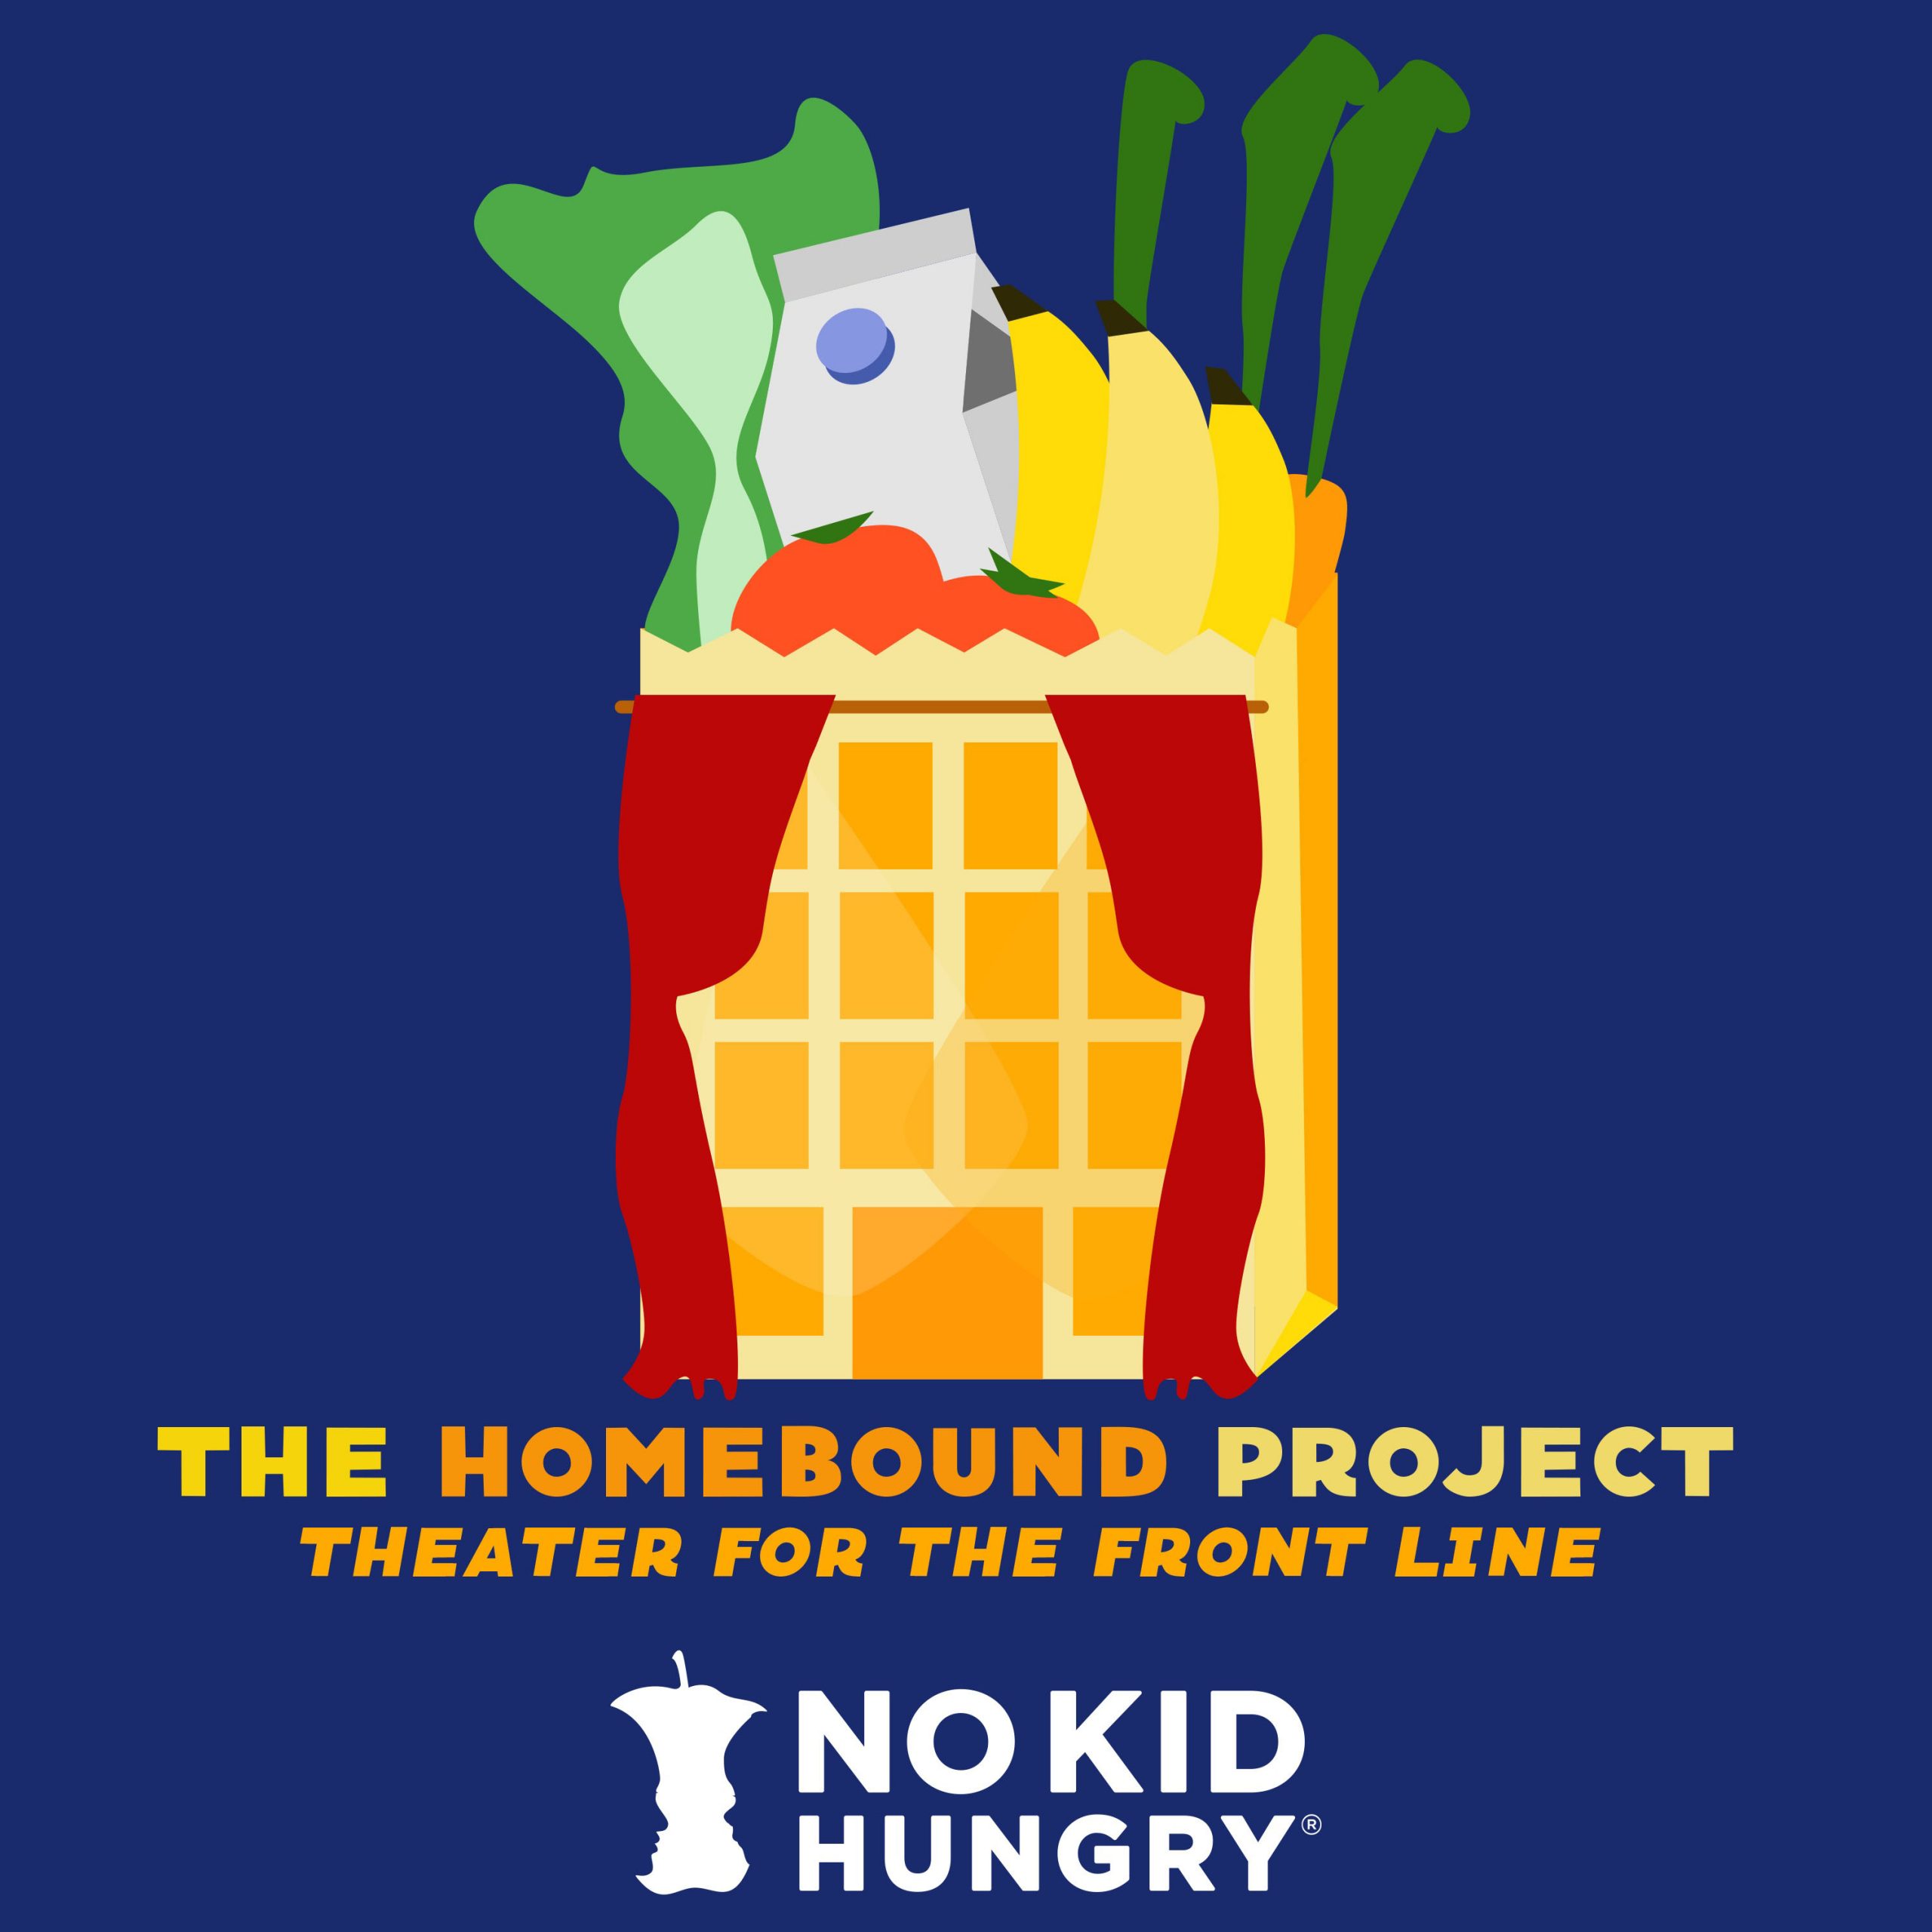 The Homebound Project logo shows a graphic illustration of a bag of groceries with the words "Theatre for the Front Line, No Kid Hungry" underneath.